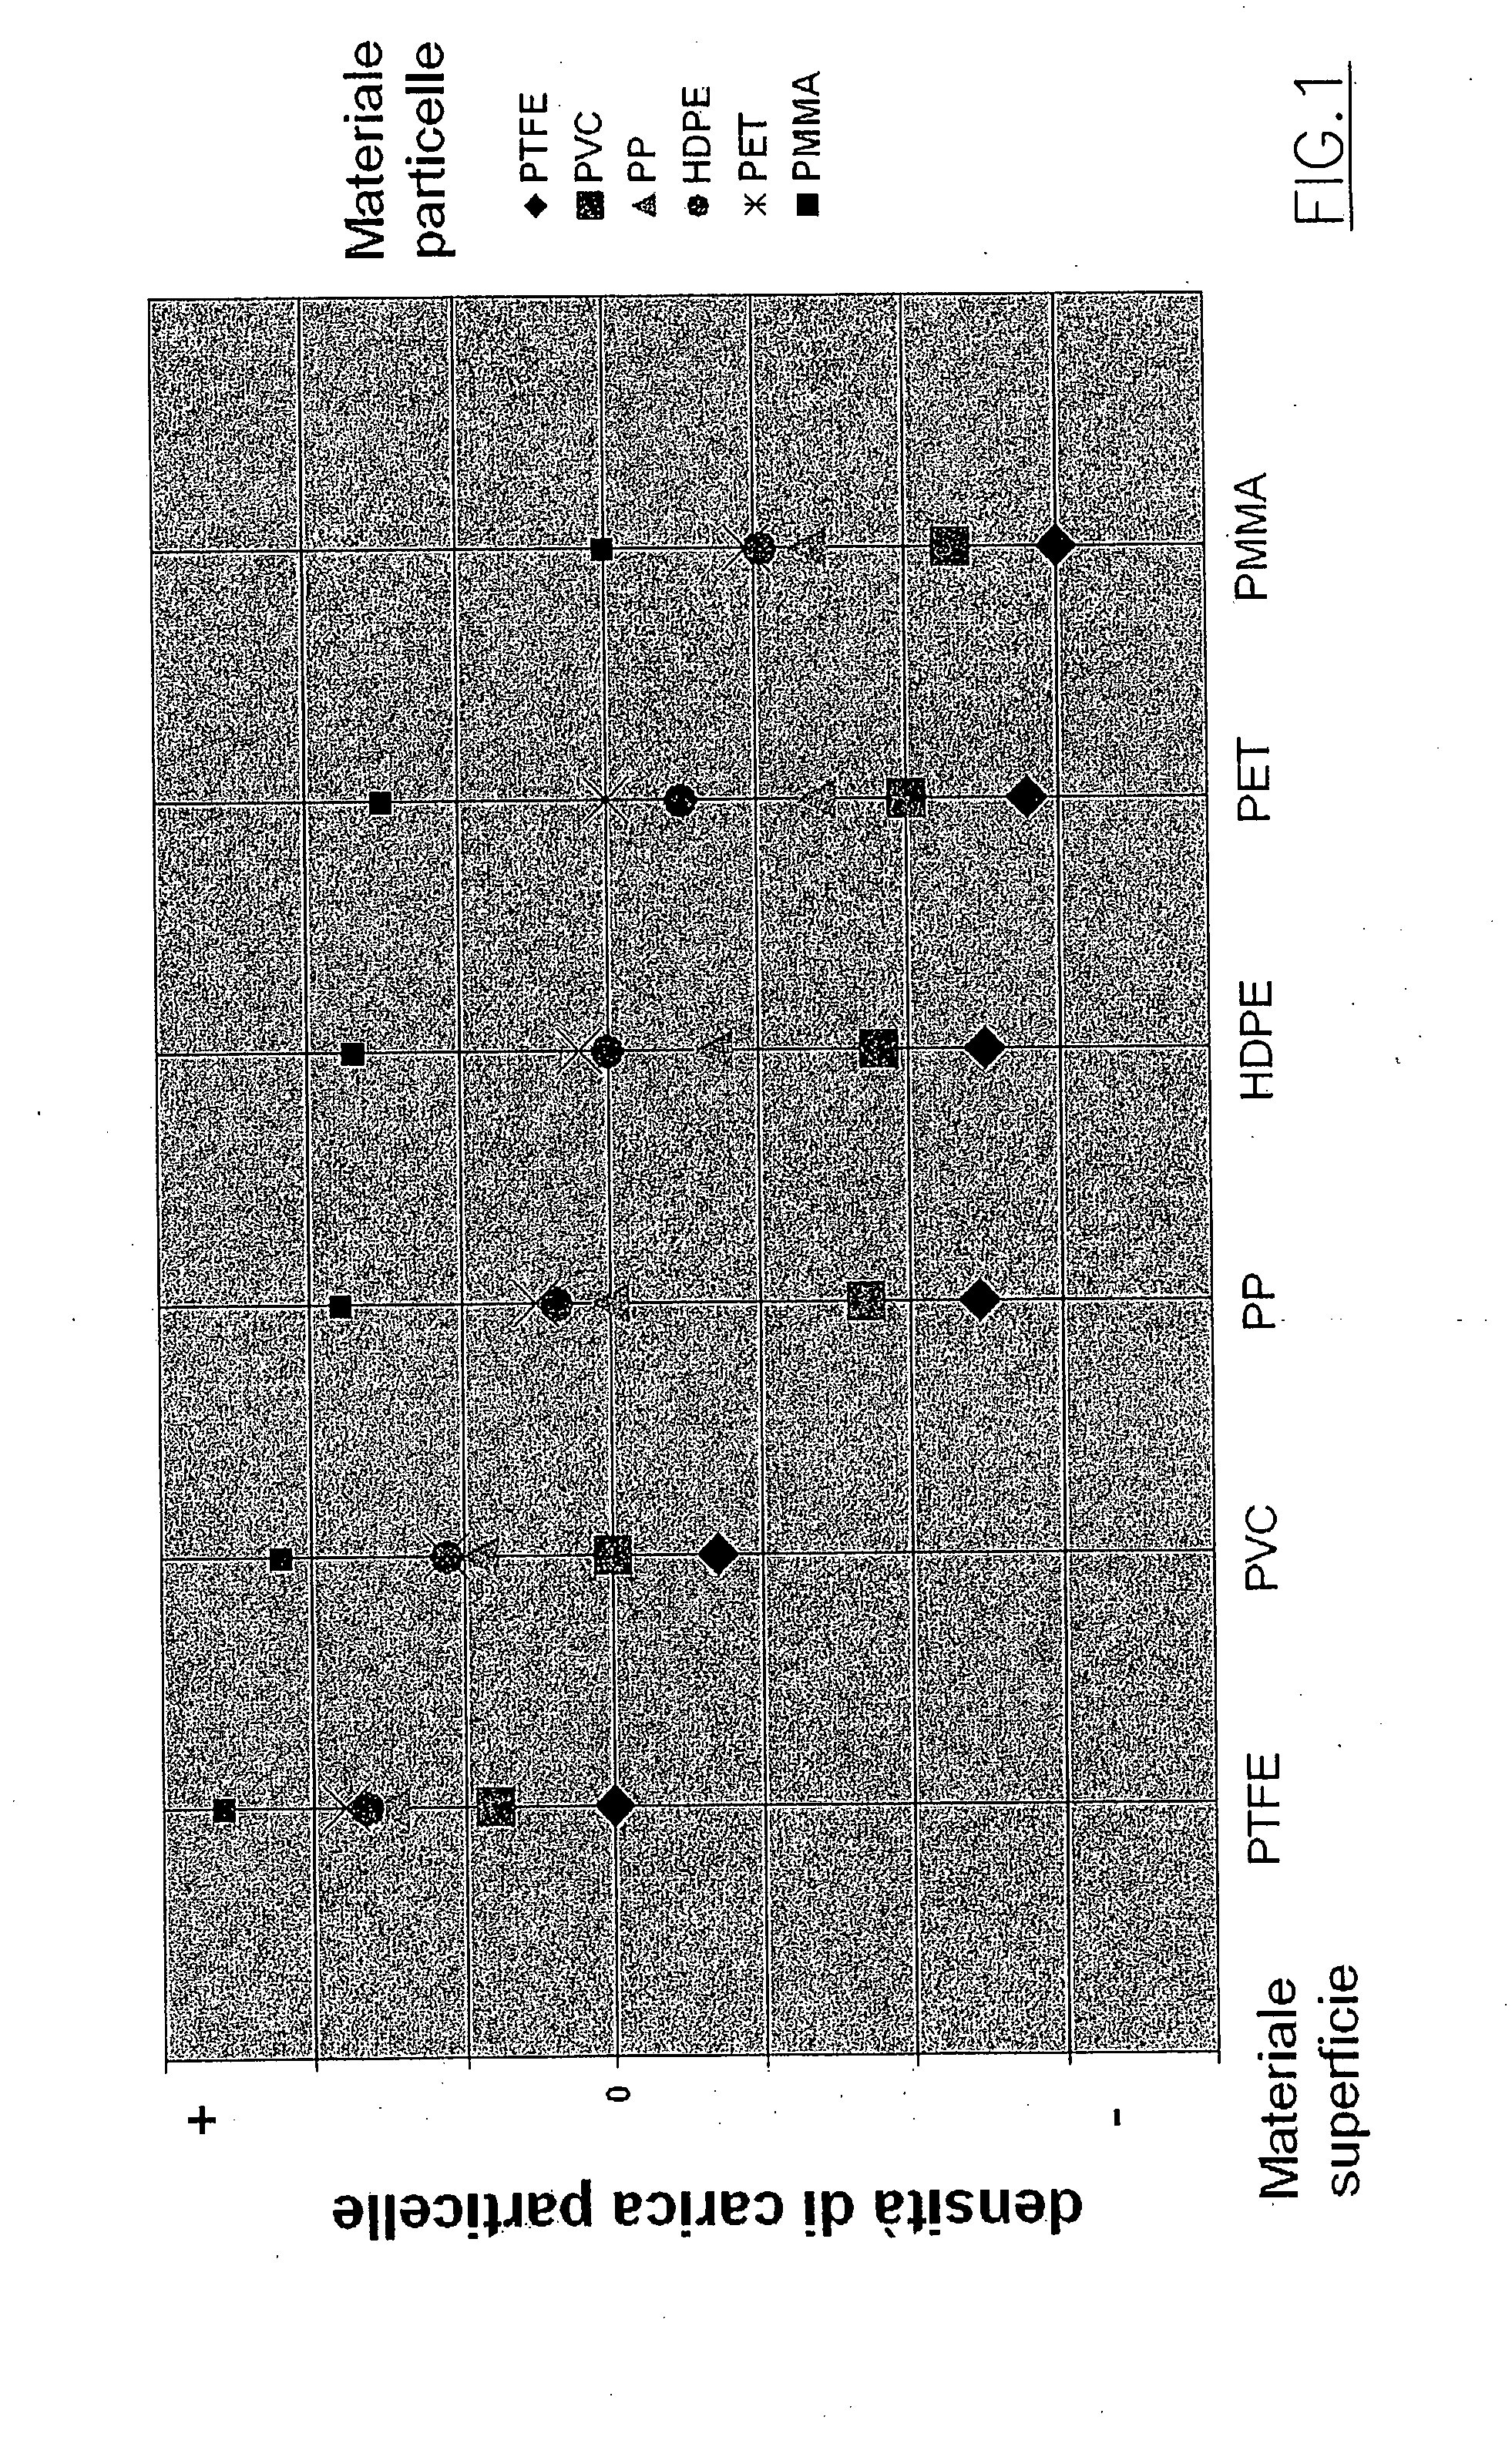 Method and a device for separating particles of a determined synthetic material from particles of different synthetic materials